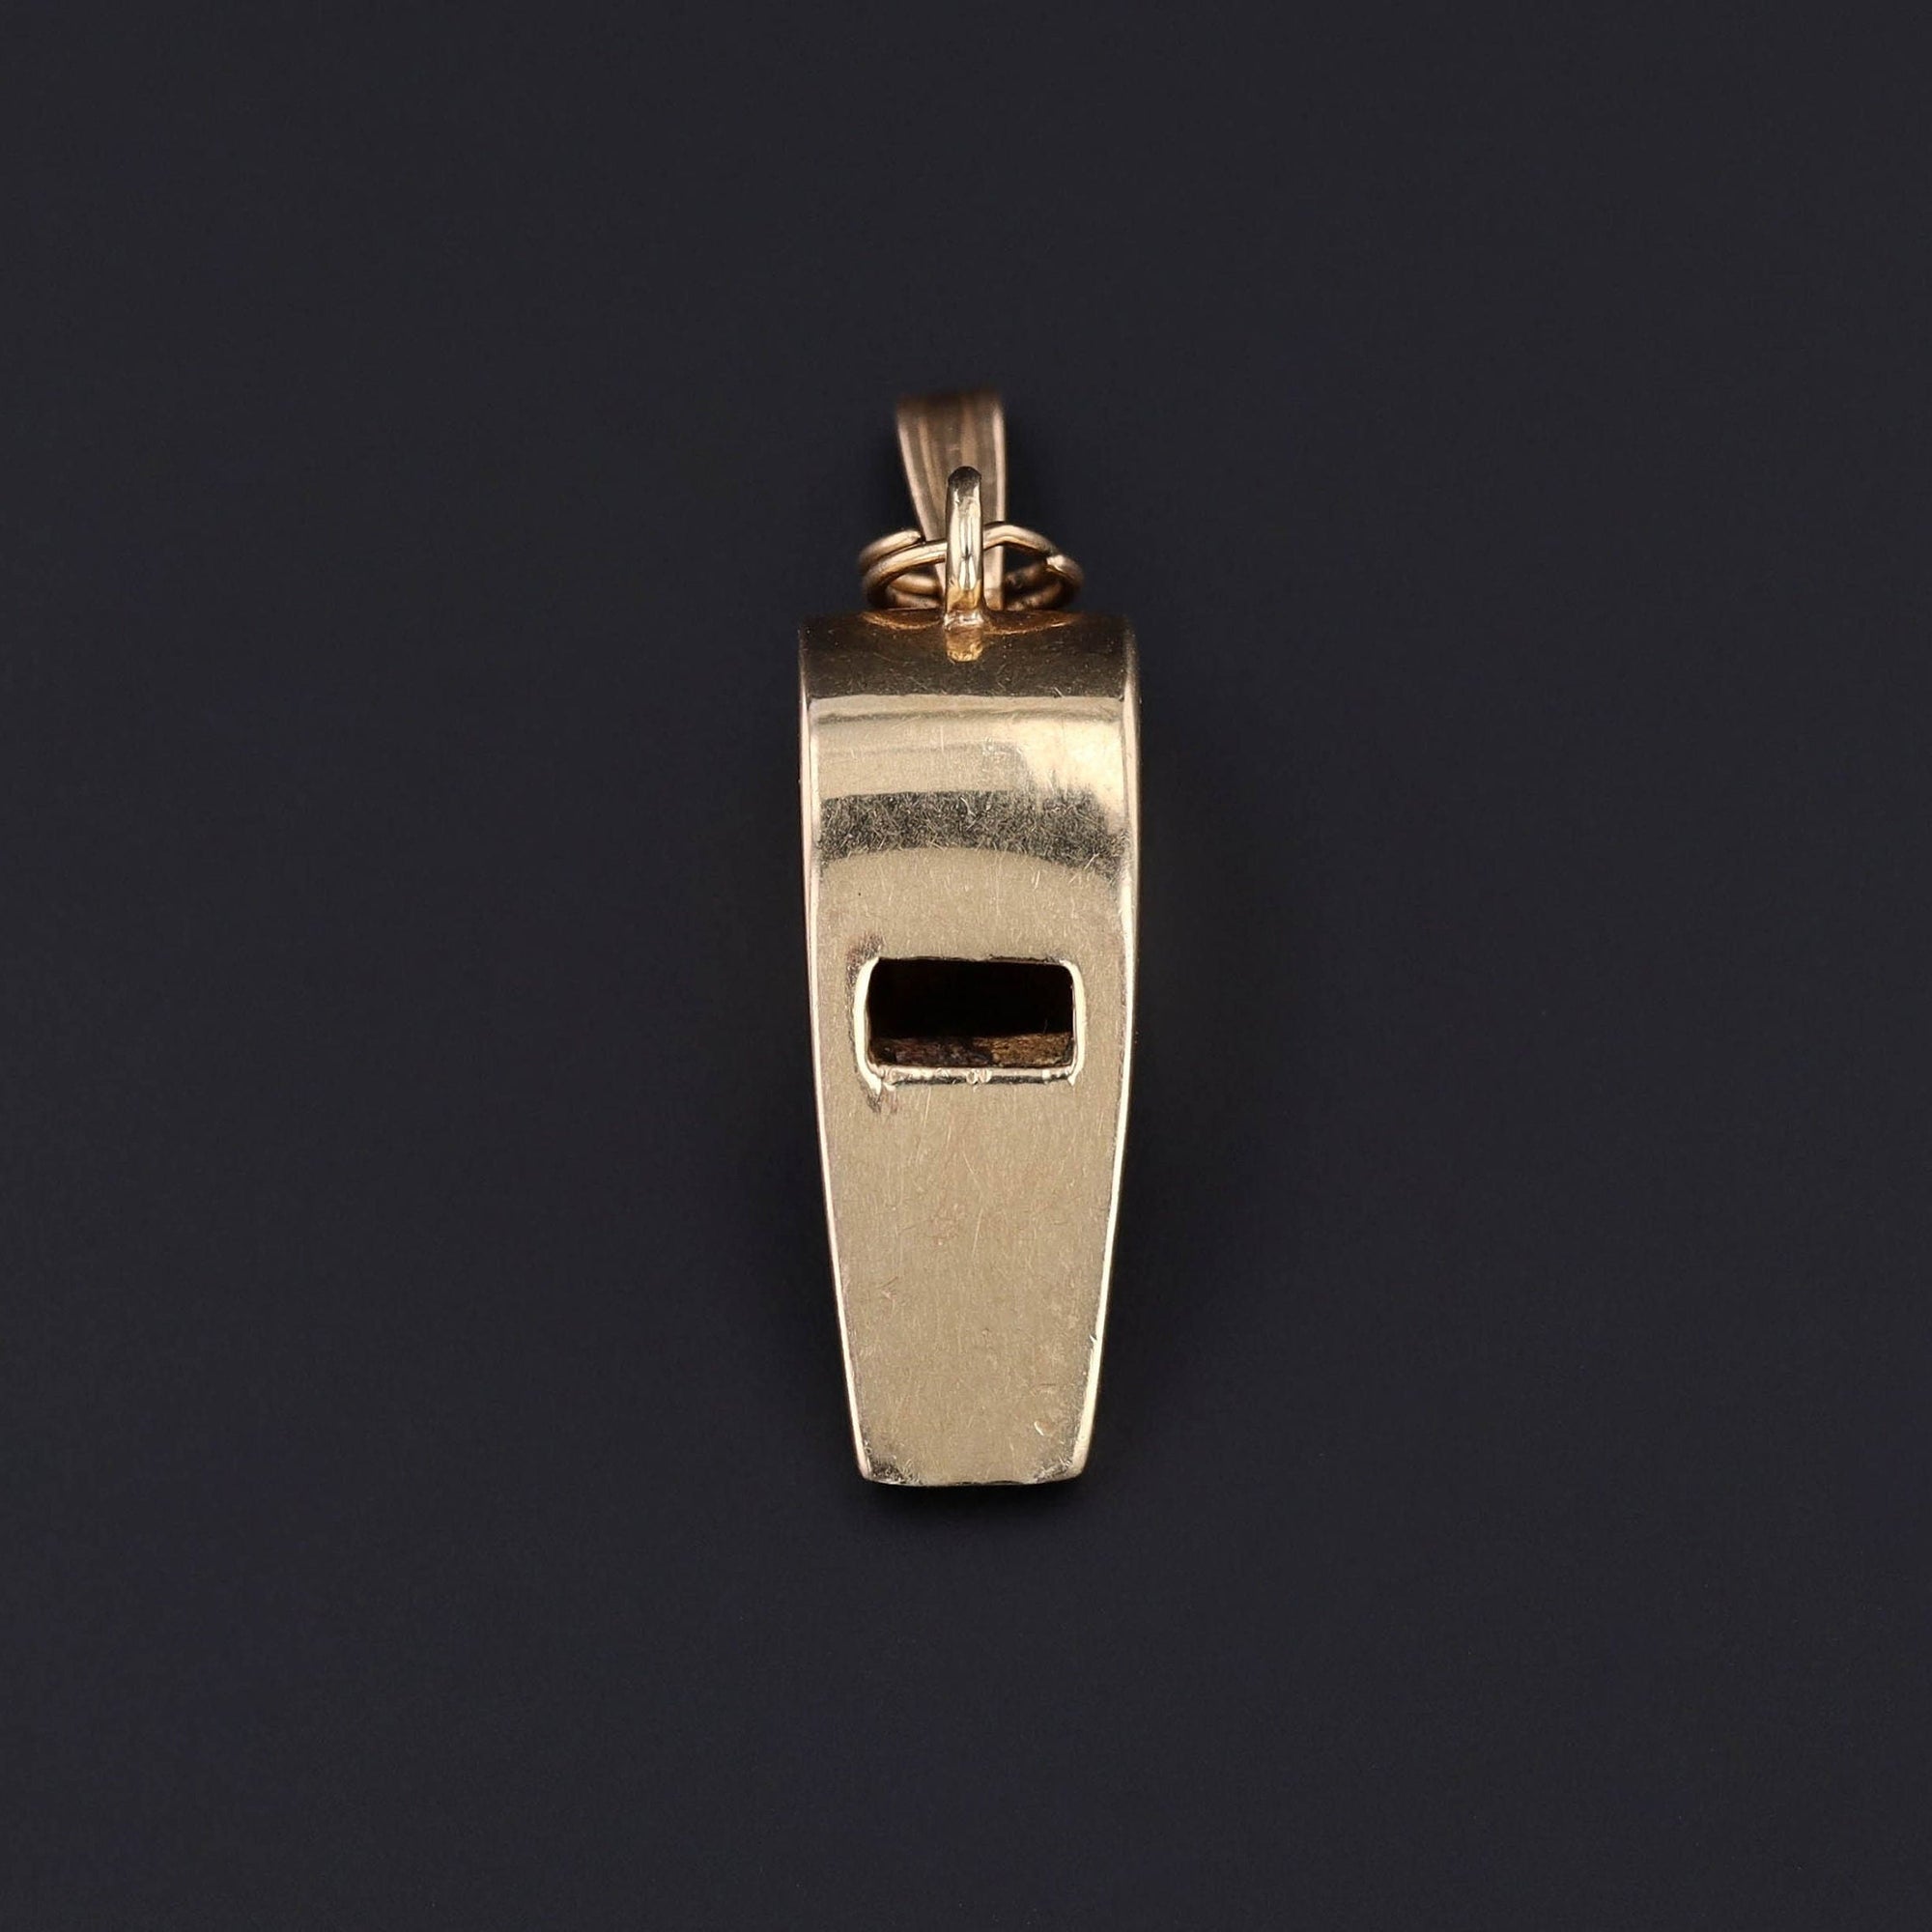 Vintage Functioning Whistle Pendant of 14k Gold